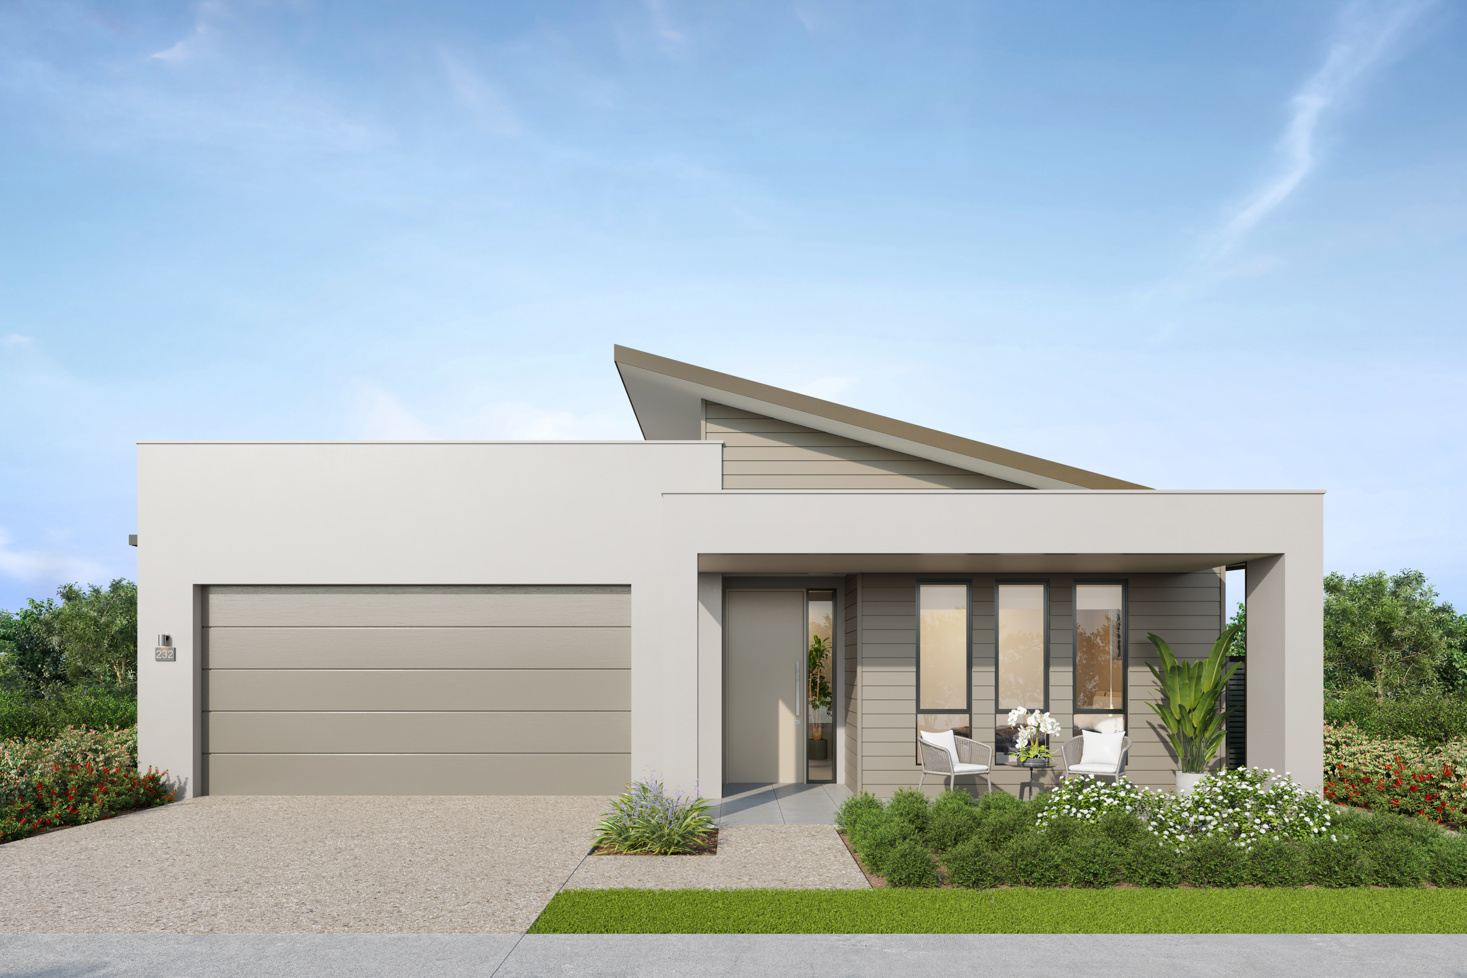 Facade render of the Kimberley S6 house design with a skillion roofline in country colour scheme, located at Stockland Halcyon Gables in The Hills district.